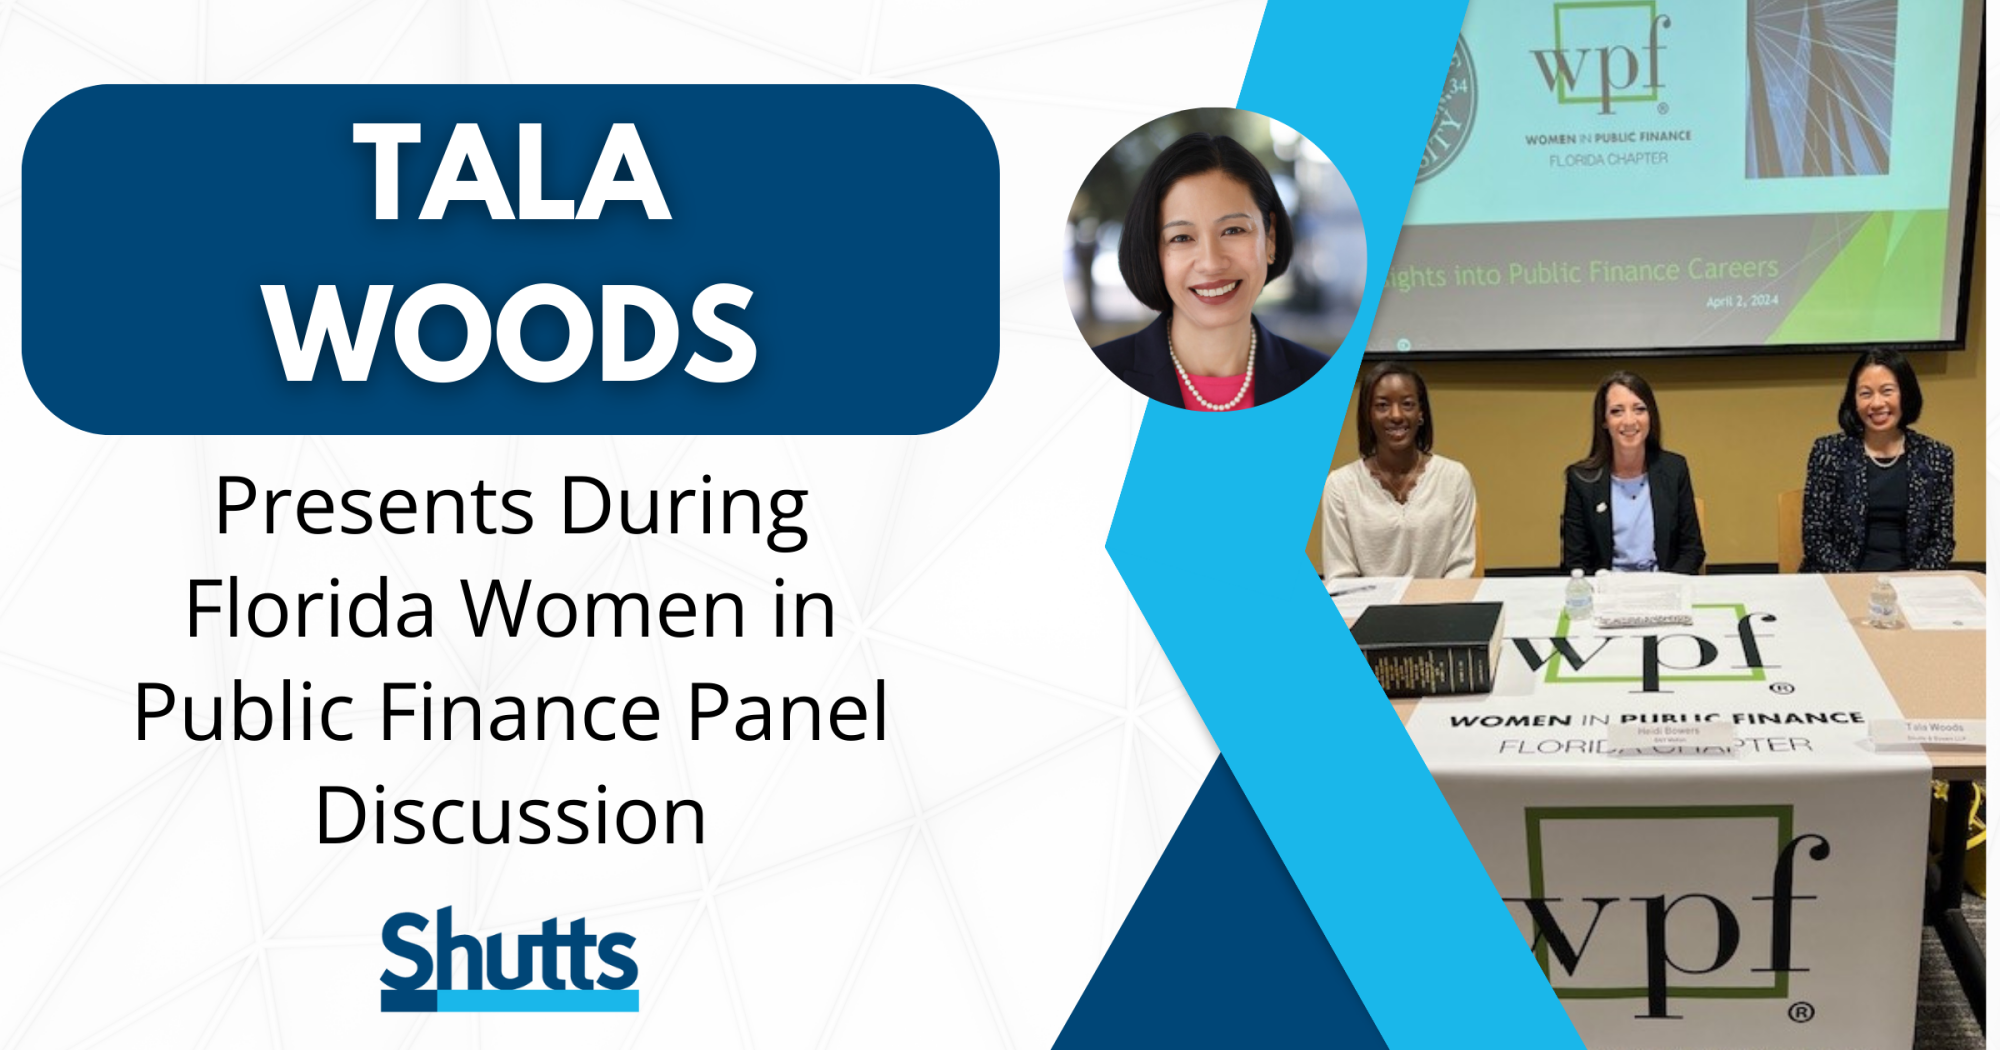 Tala Woods Presents During Florida Women in Public Finance Panel Discussion